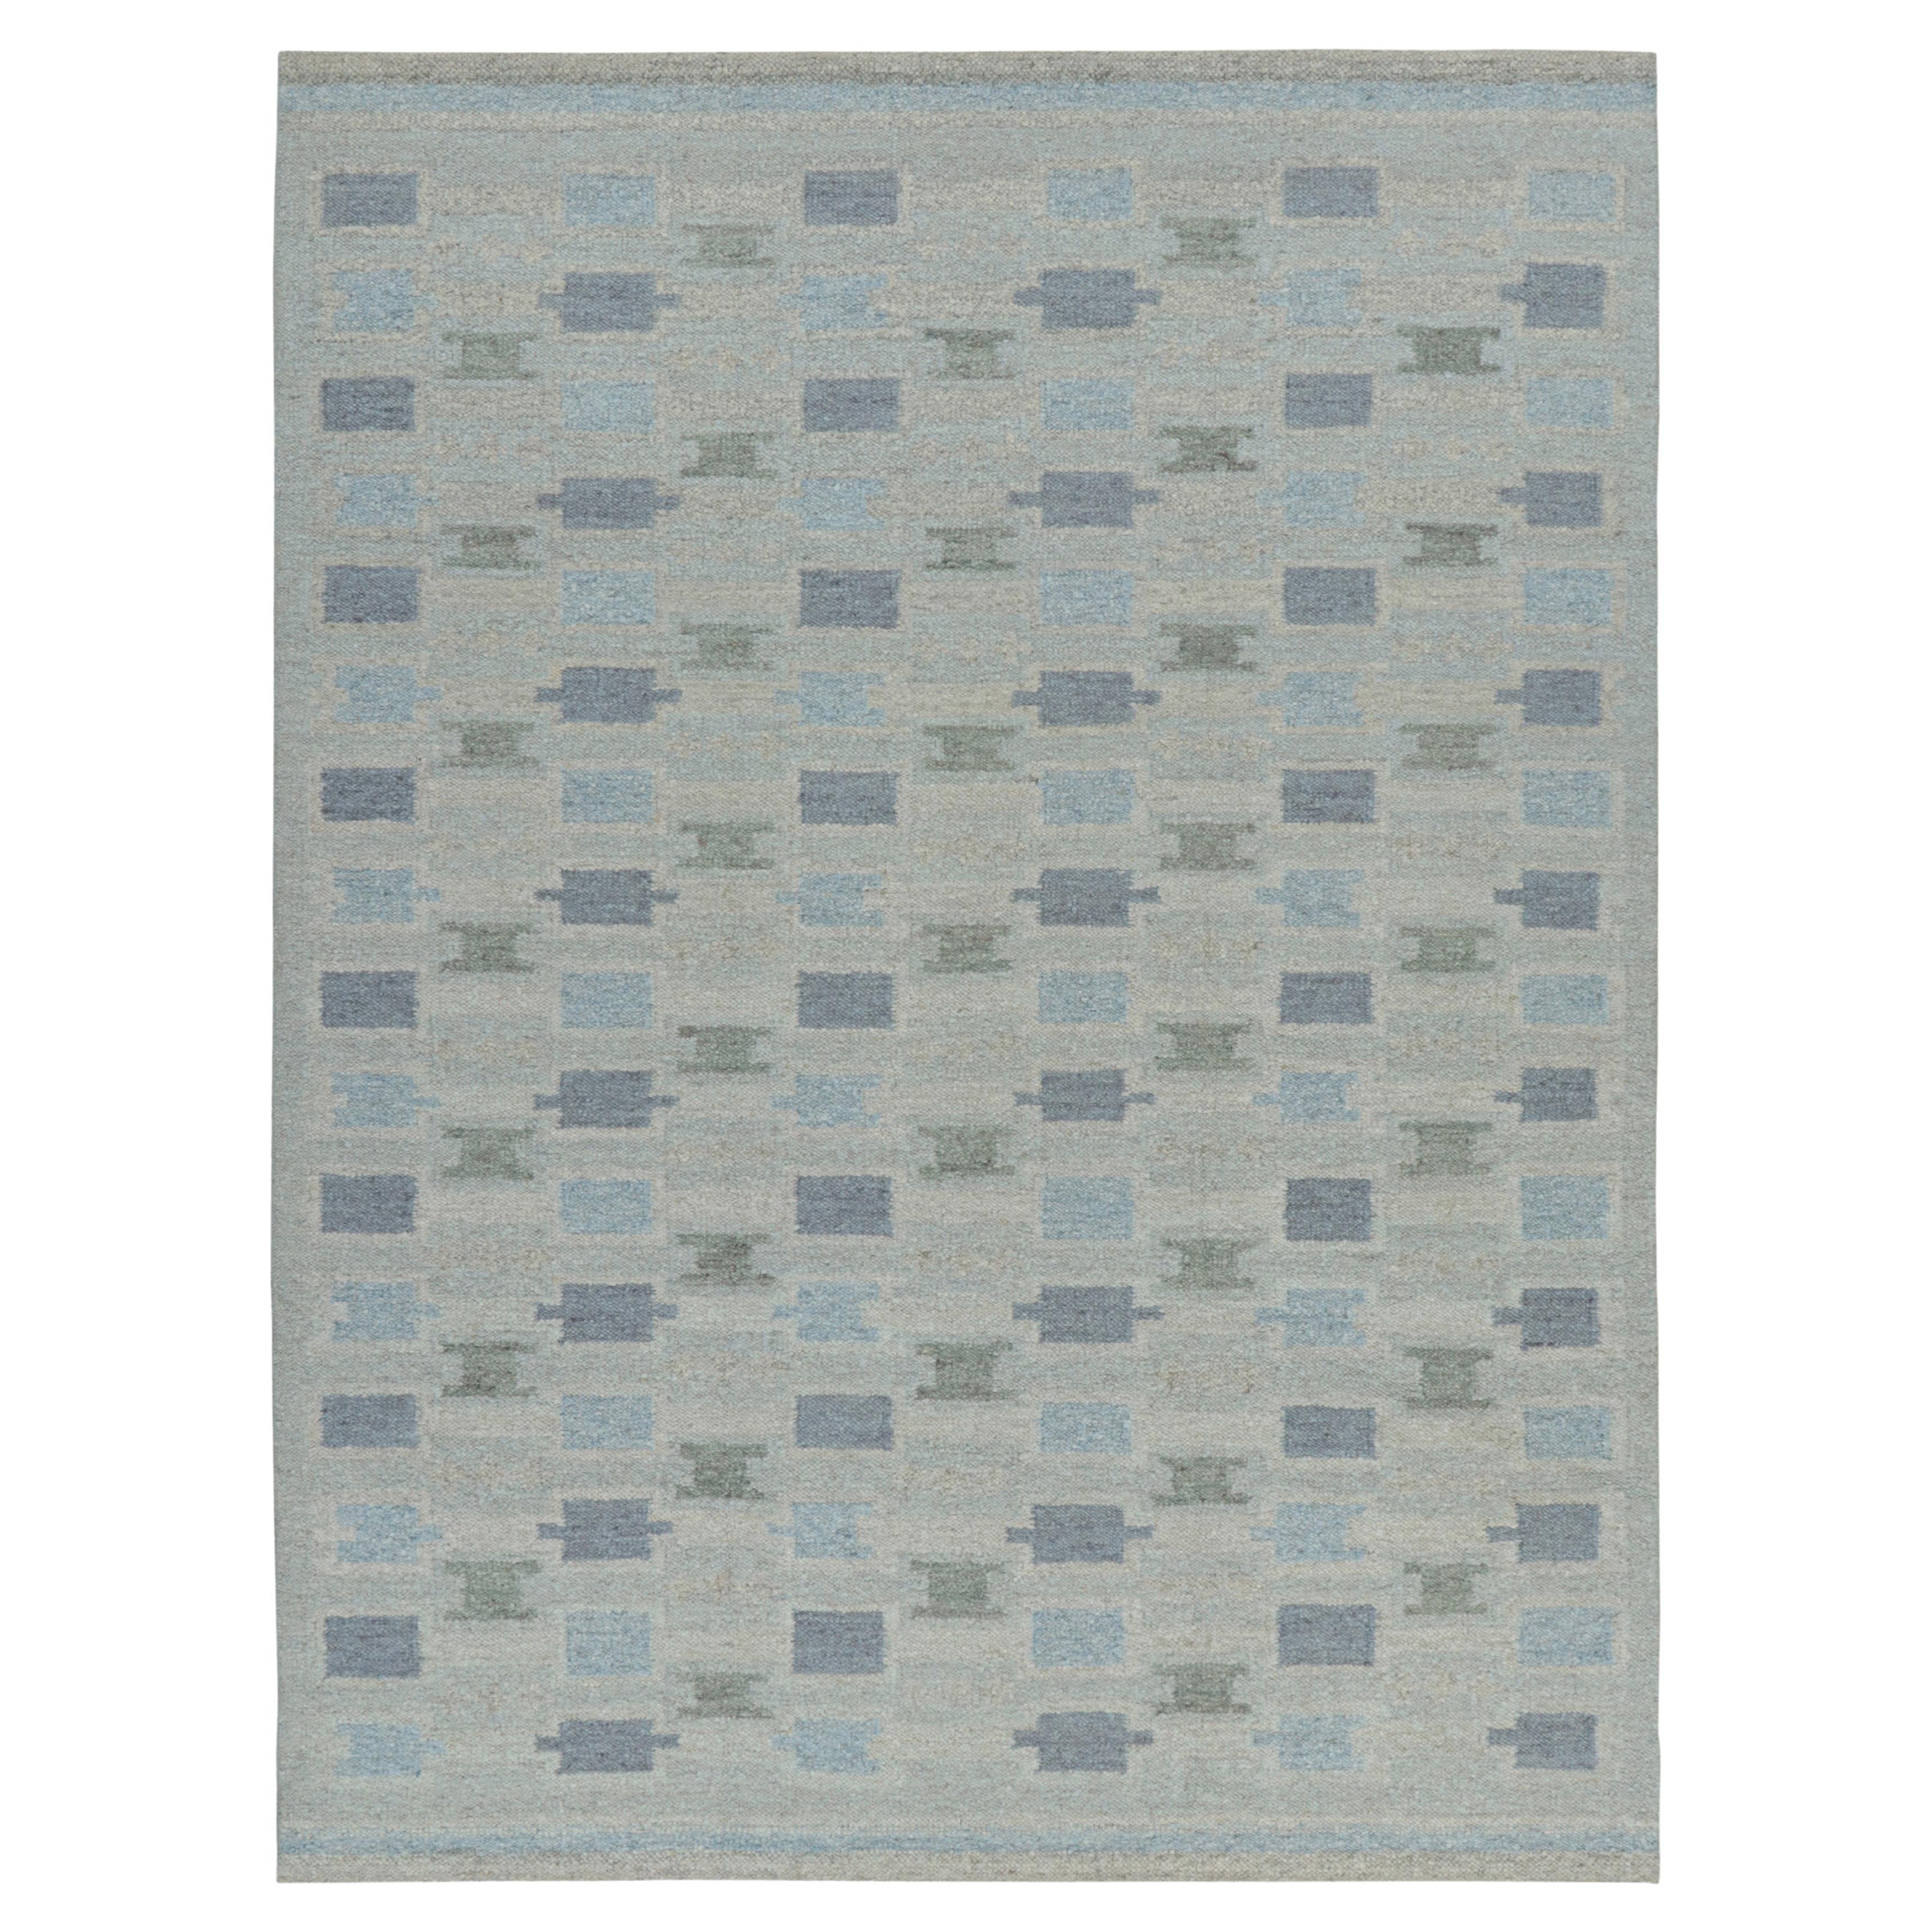 Rug & Kilim’s Scandinavian Style Rug in Blue Tones with Geometric Patterns For Sale